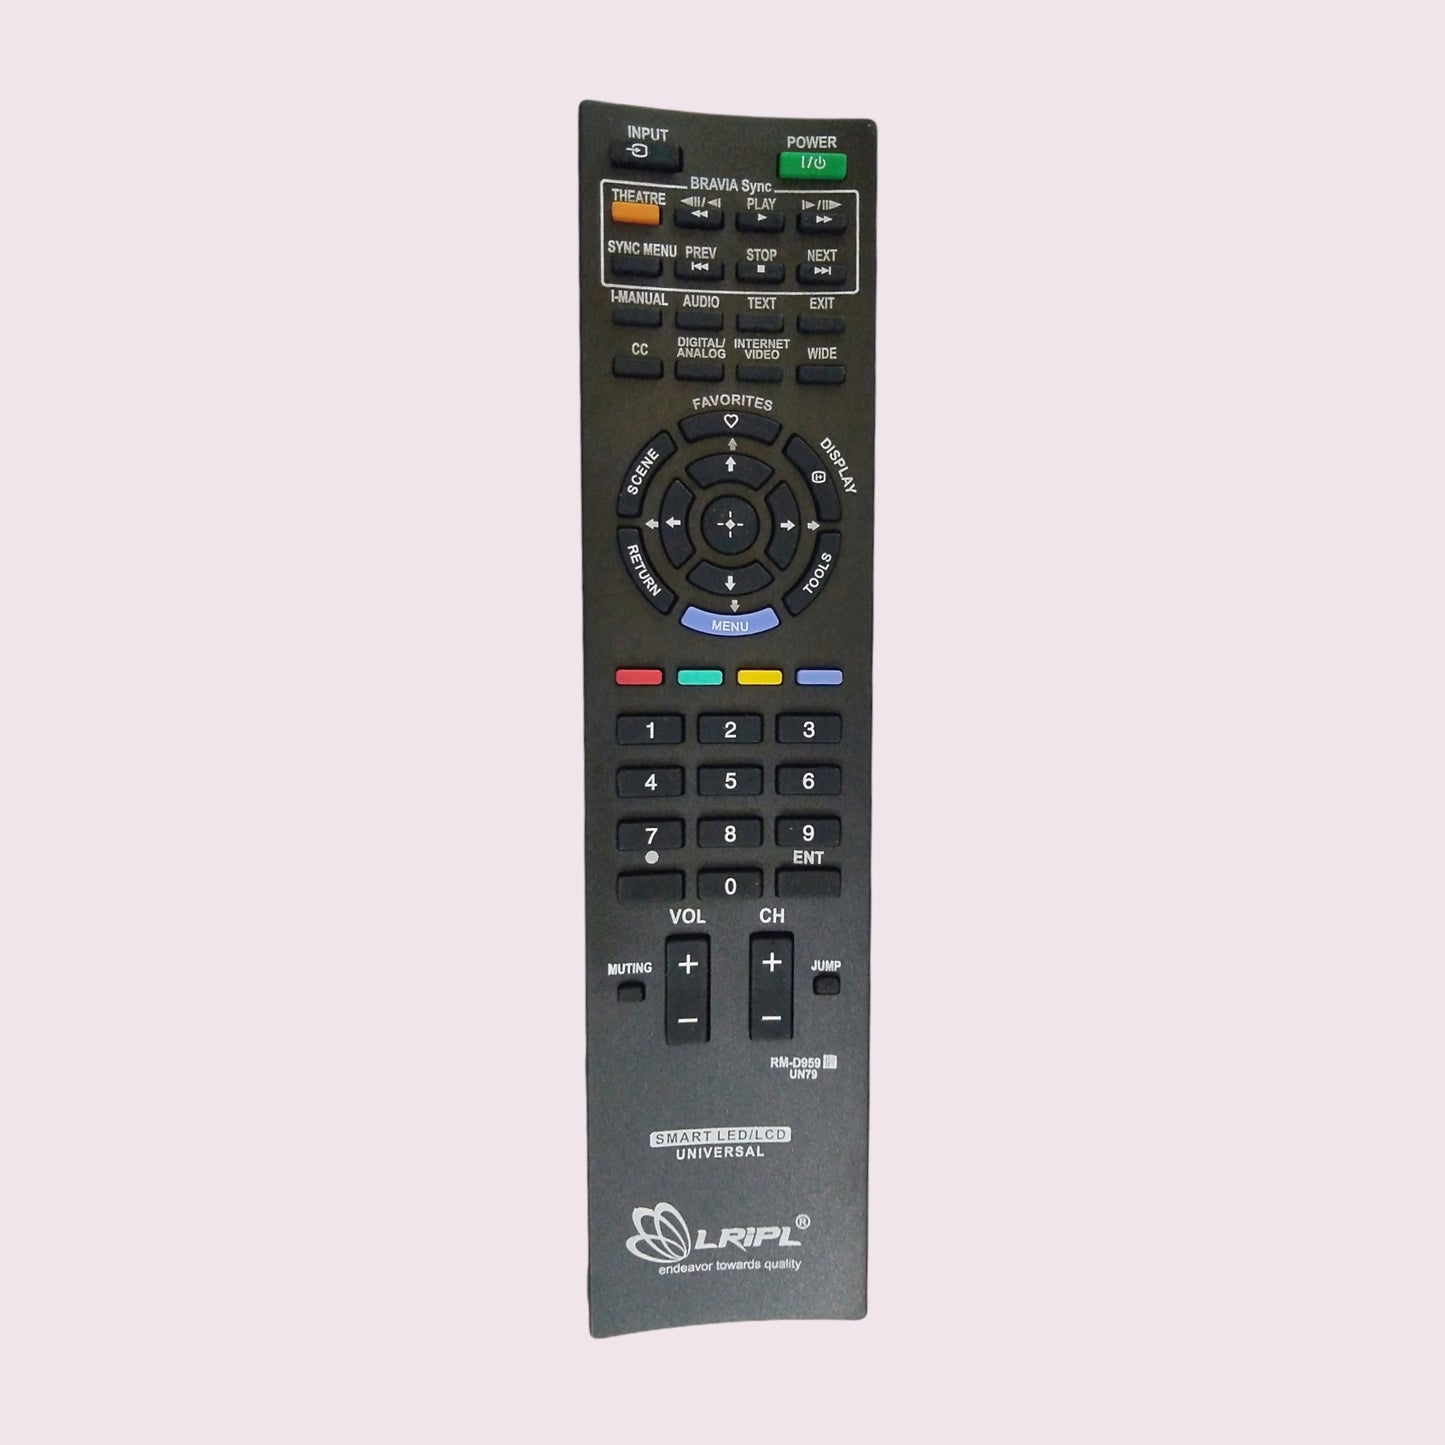 Sony LED/LCD TV Universal Remote (LD47)